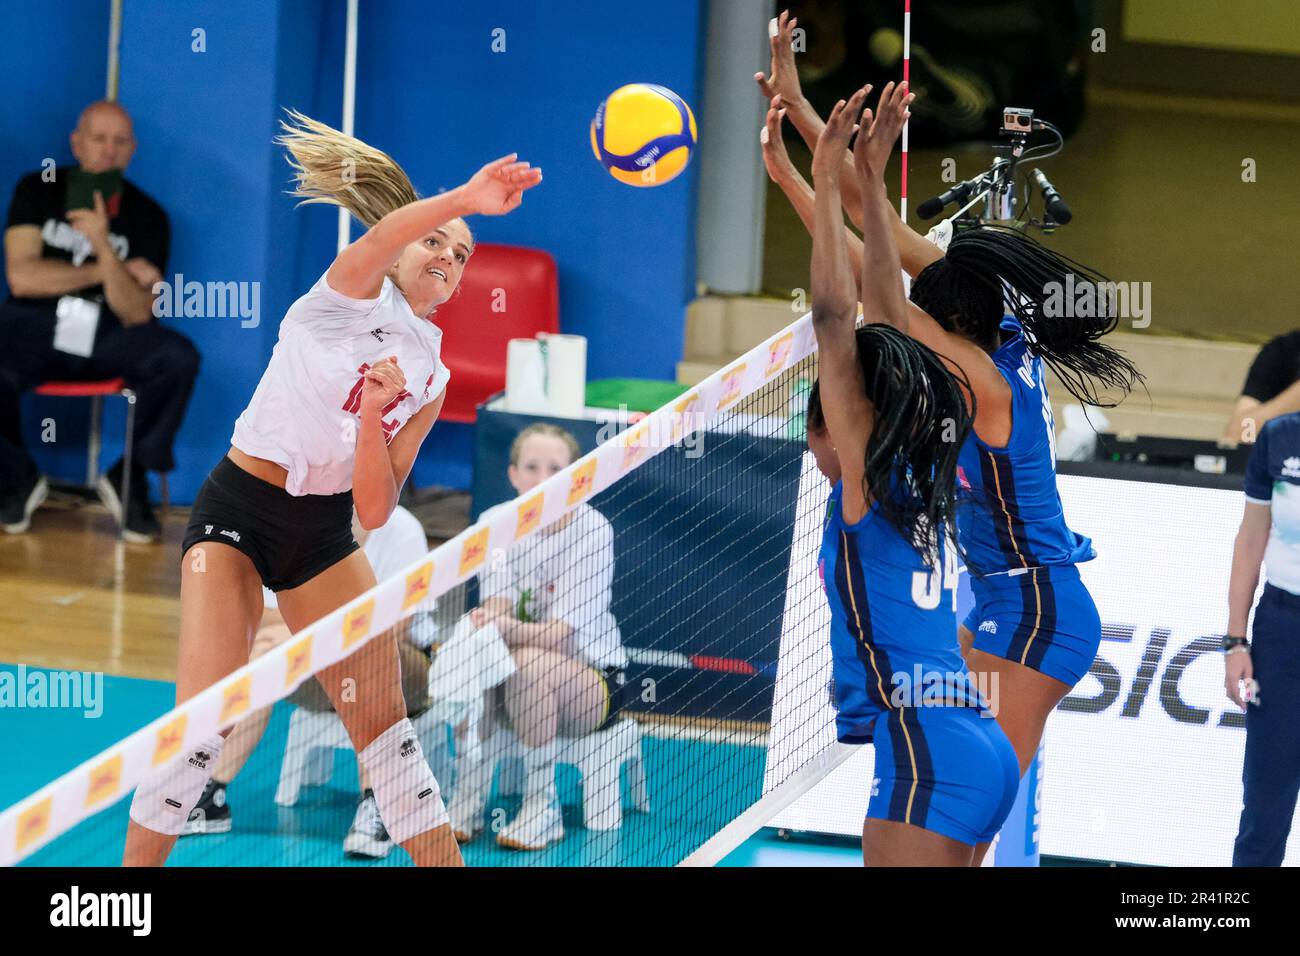 Hilary Howe of Canada in action during the DHL Test Match Tournament women’s volleyball between Italy and Canada at Palazzetto dello Sport. Final score; Italy 3:1 Canada. Stock Photo